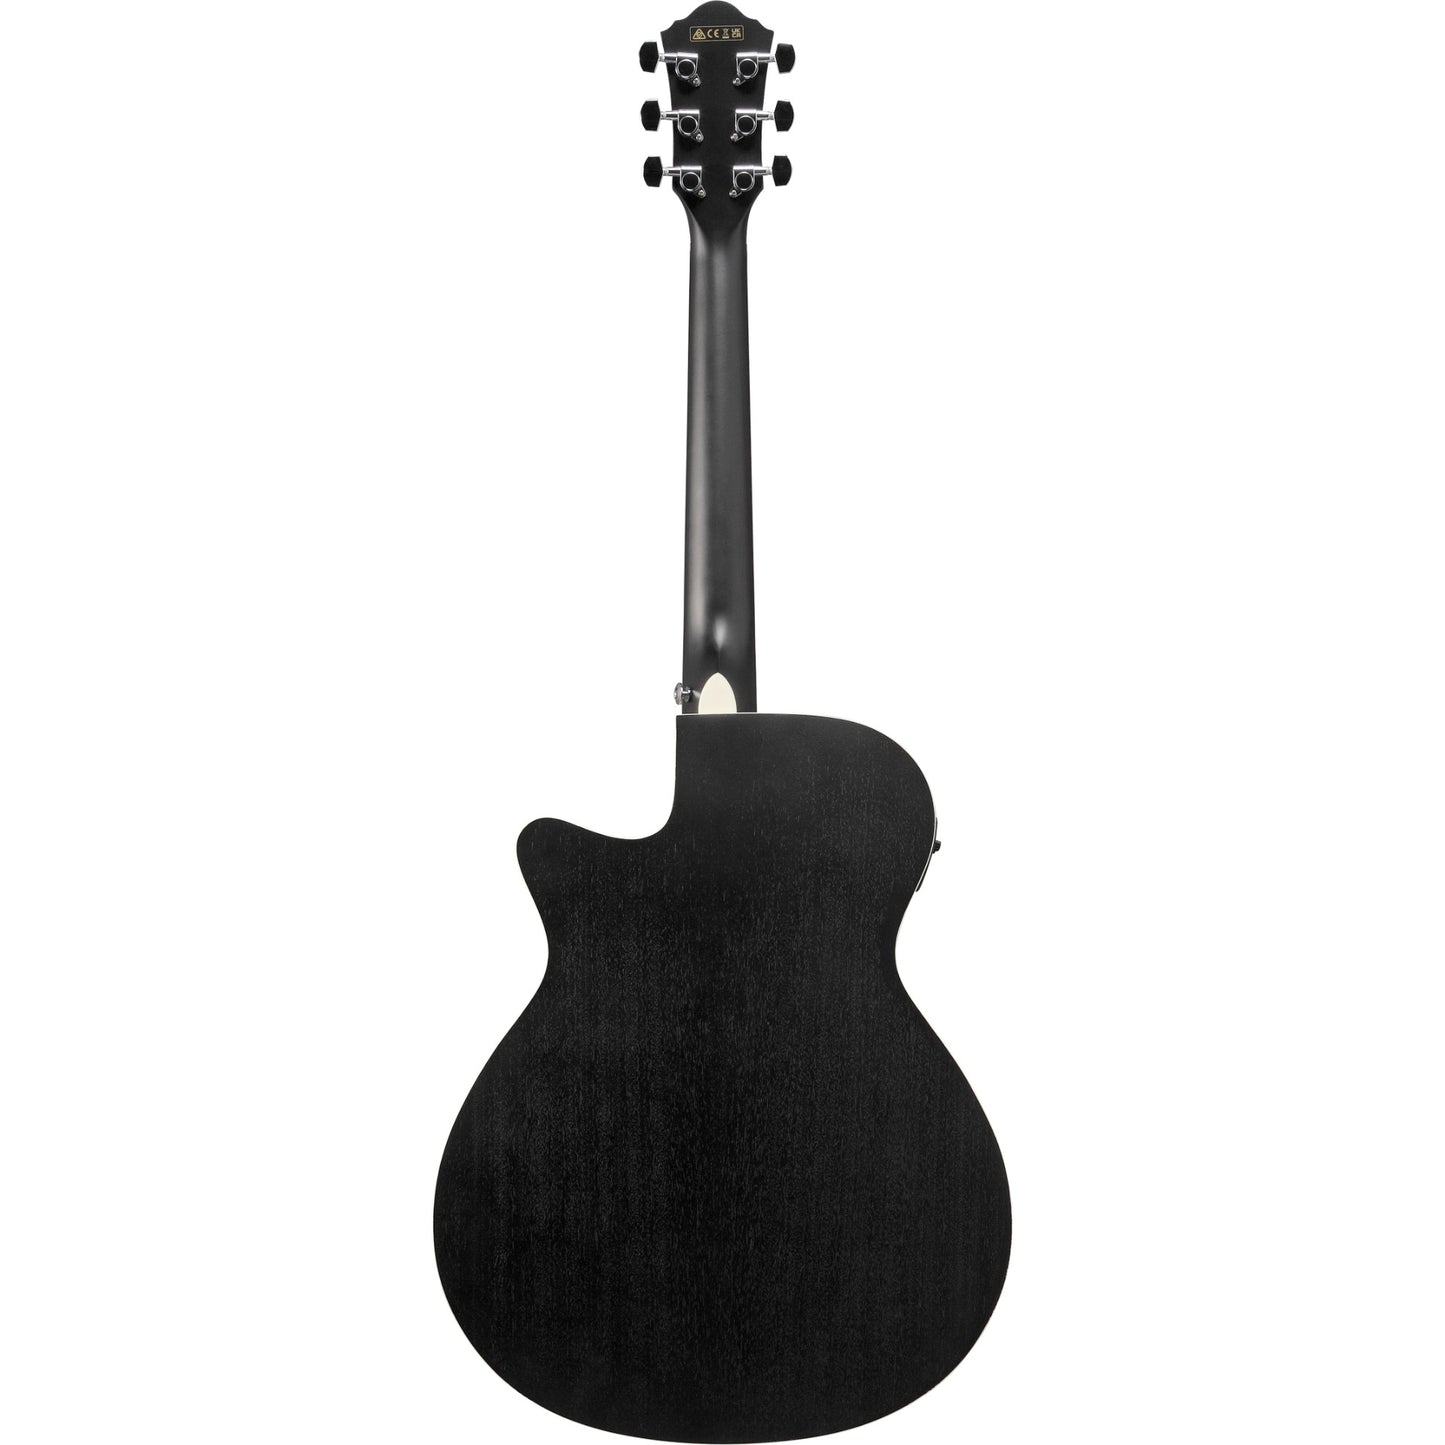 Ibanez AEG7MH Acoustic Electric Guitar in Weathered Black Open Pore